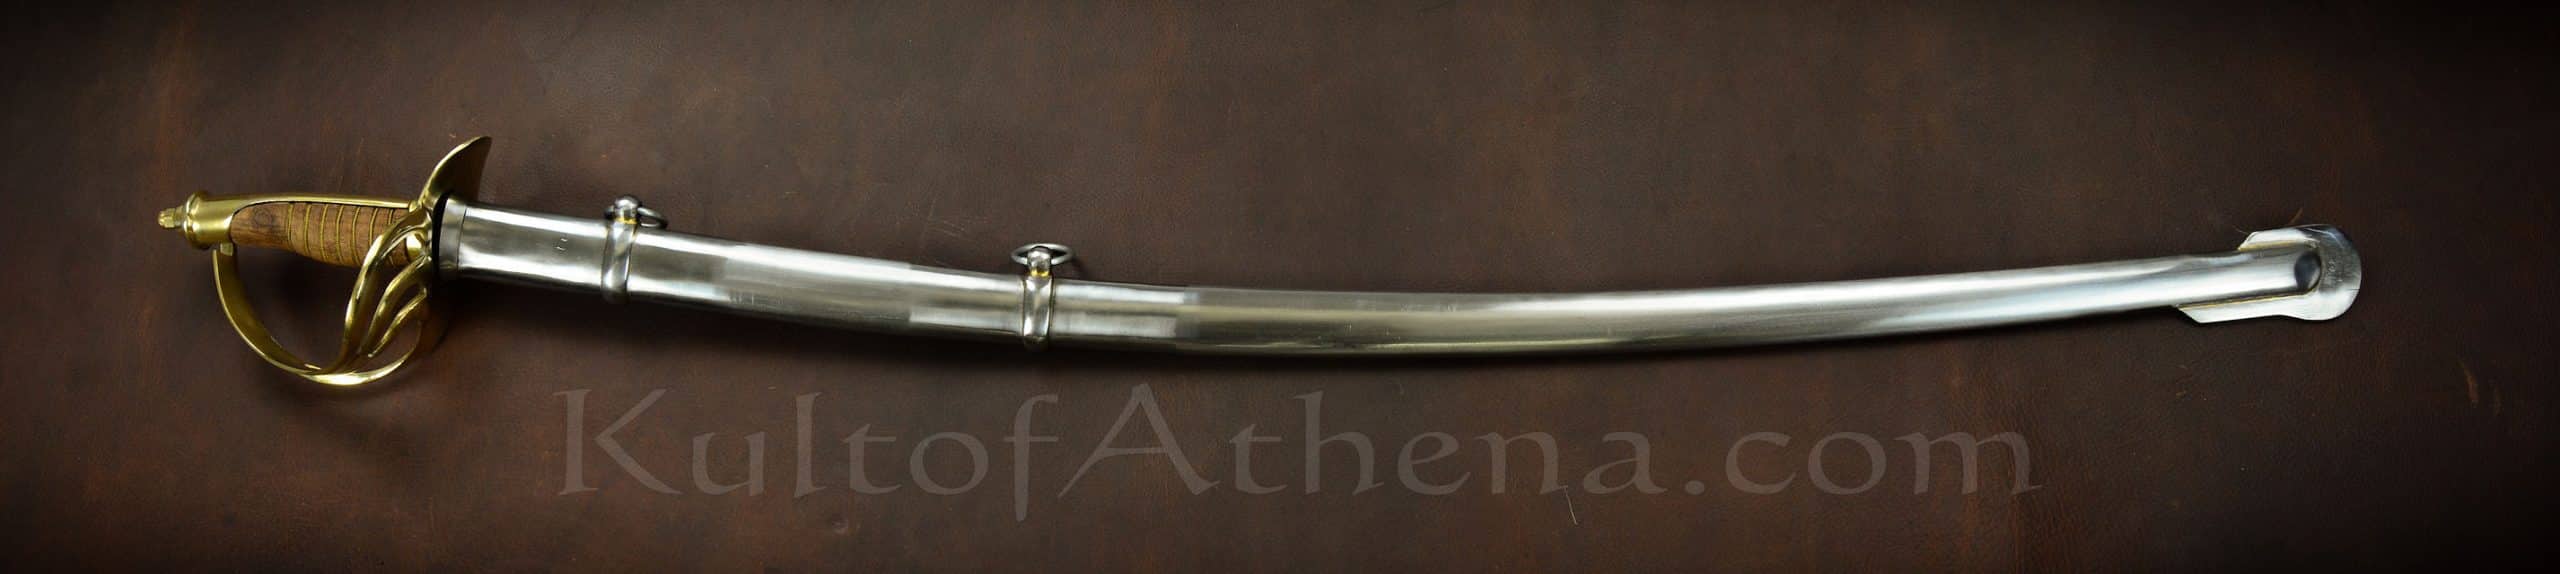 US 1860 Cavalry Saber with Wood Grip